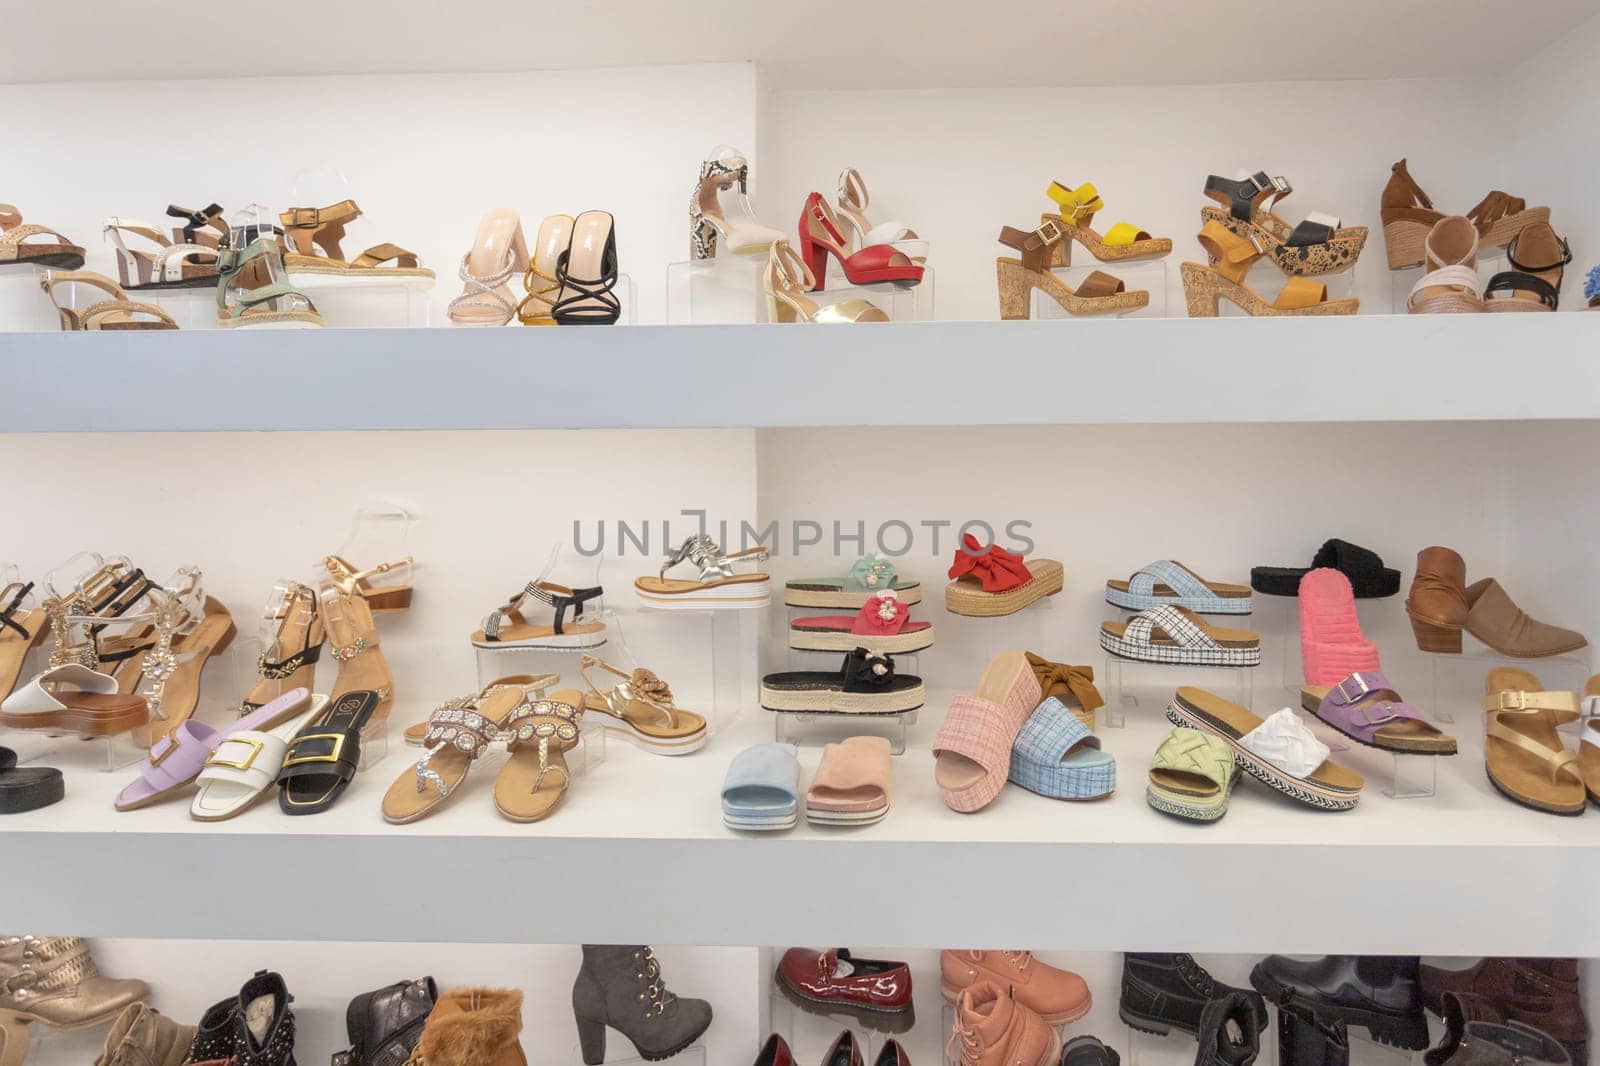 Elegant women's shoes displayed in a shoe shop by mailos